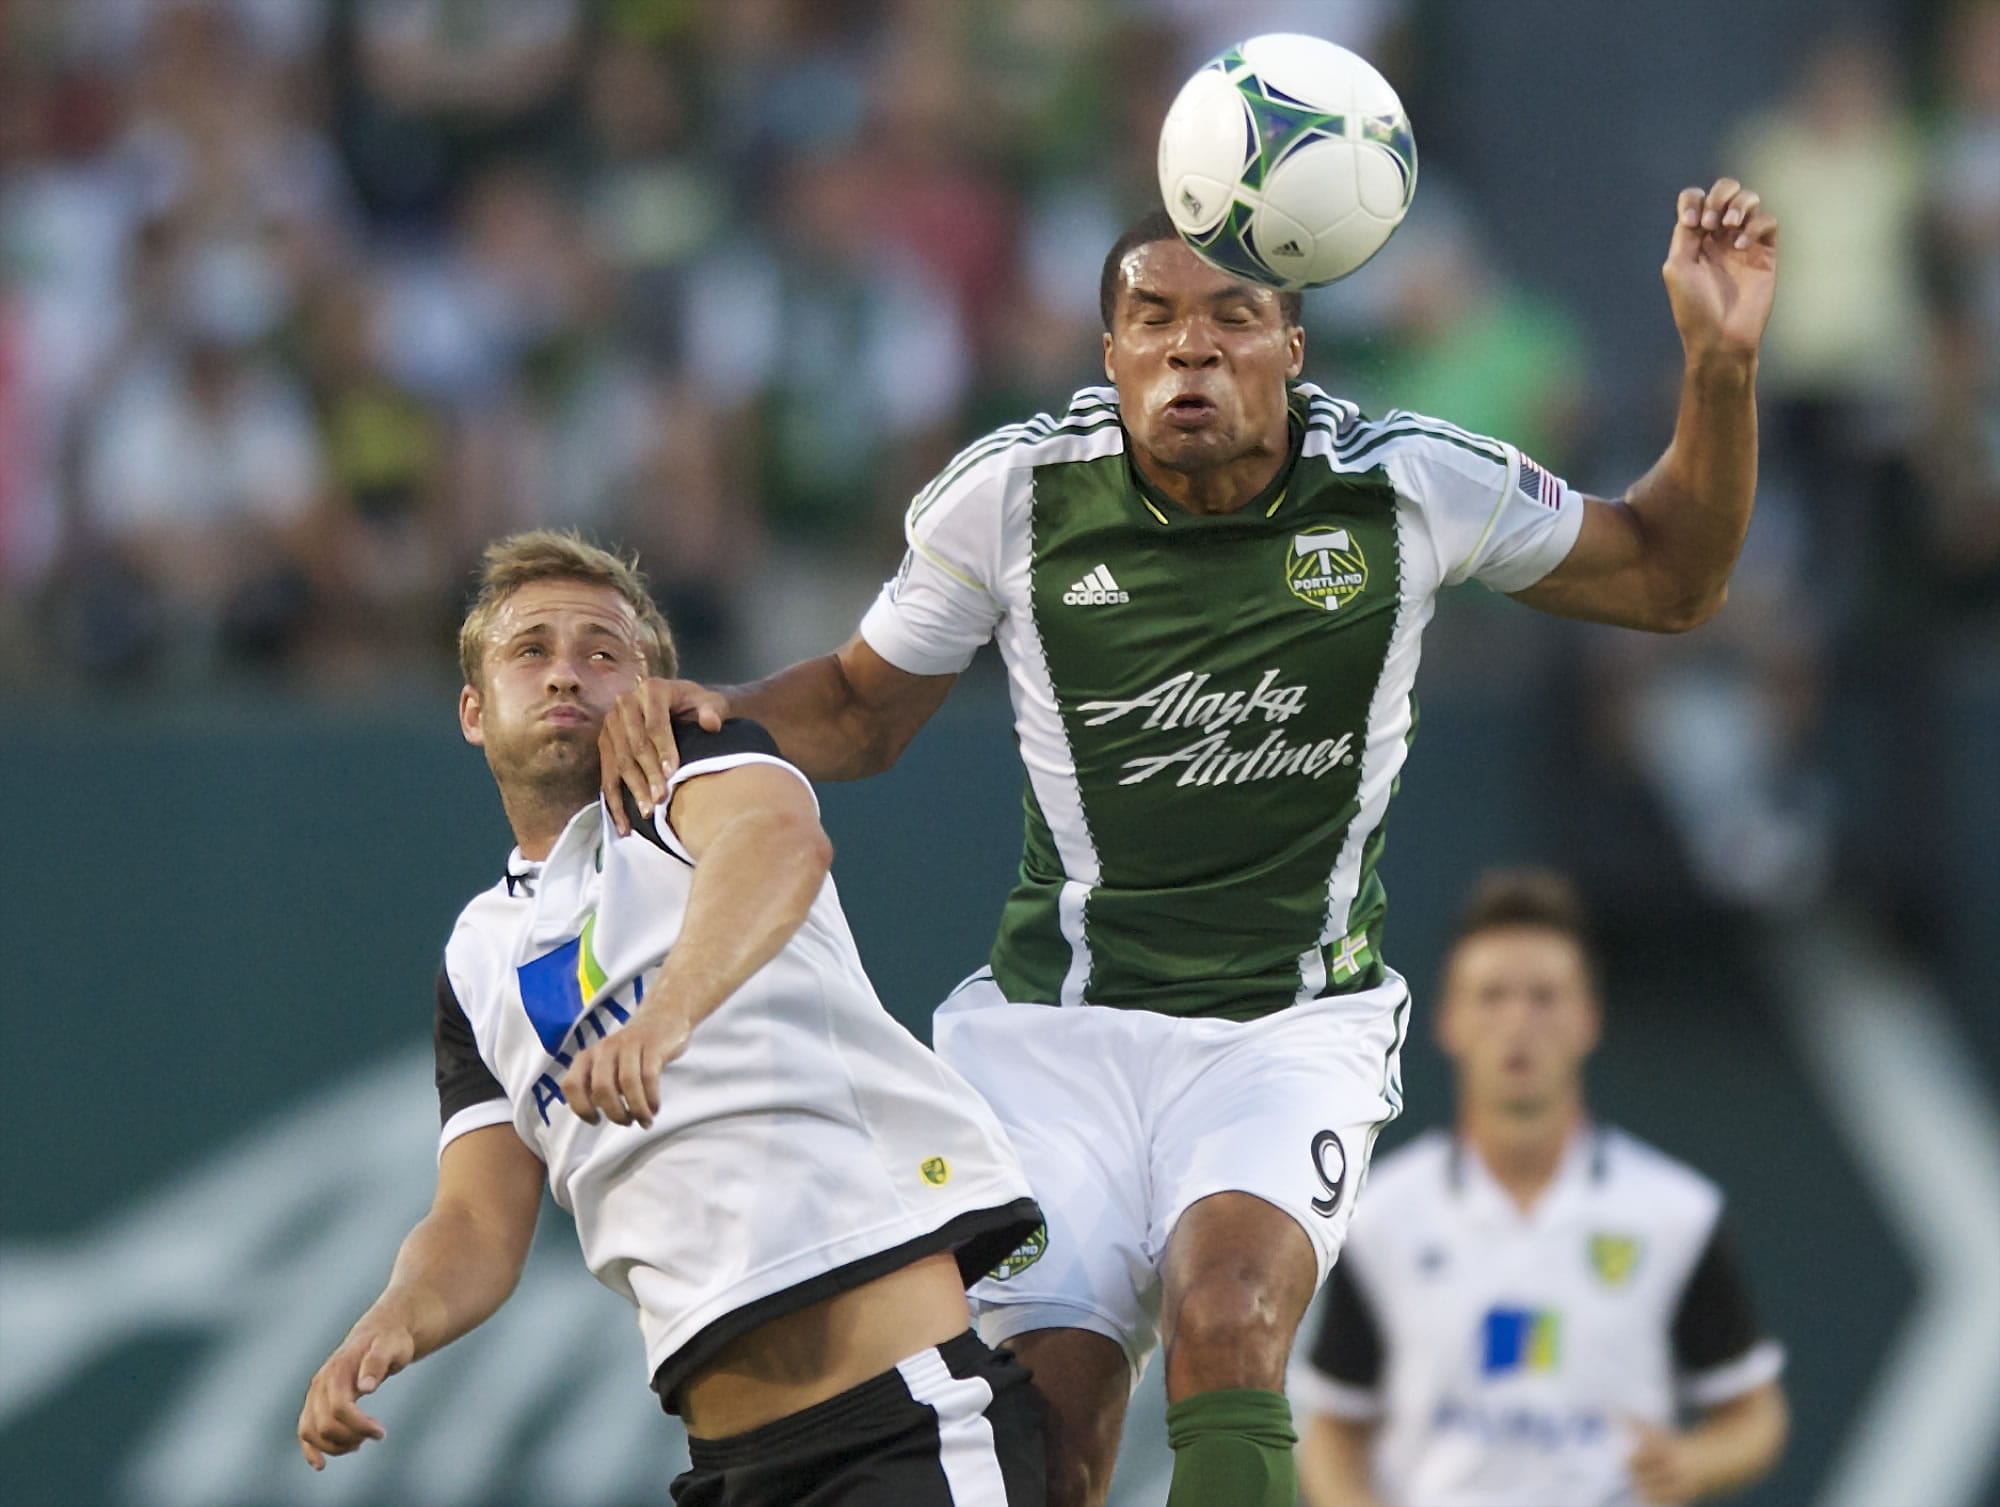 The Portland Timbers' Ryan Johnson gets to the ball before Norwich City midfielder David Fox in the first half at Jeld-Wen Field on Wednesday.